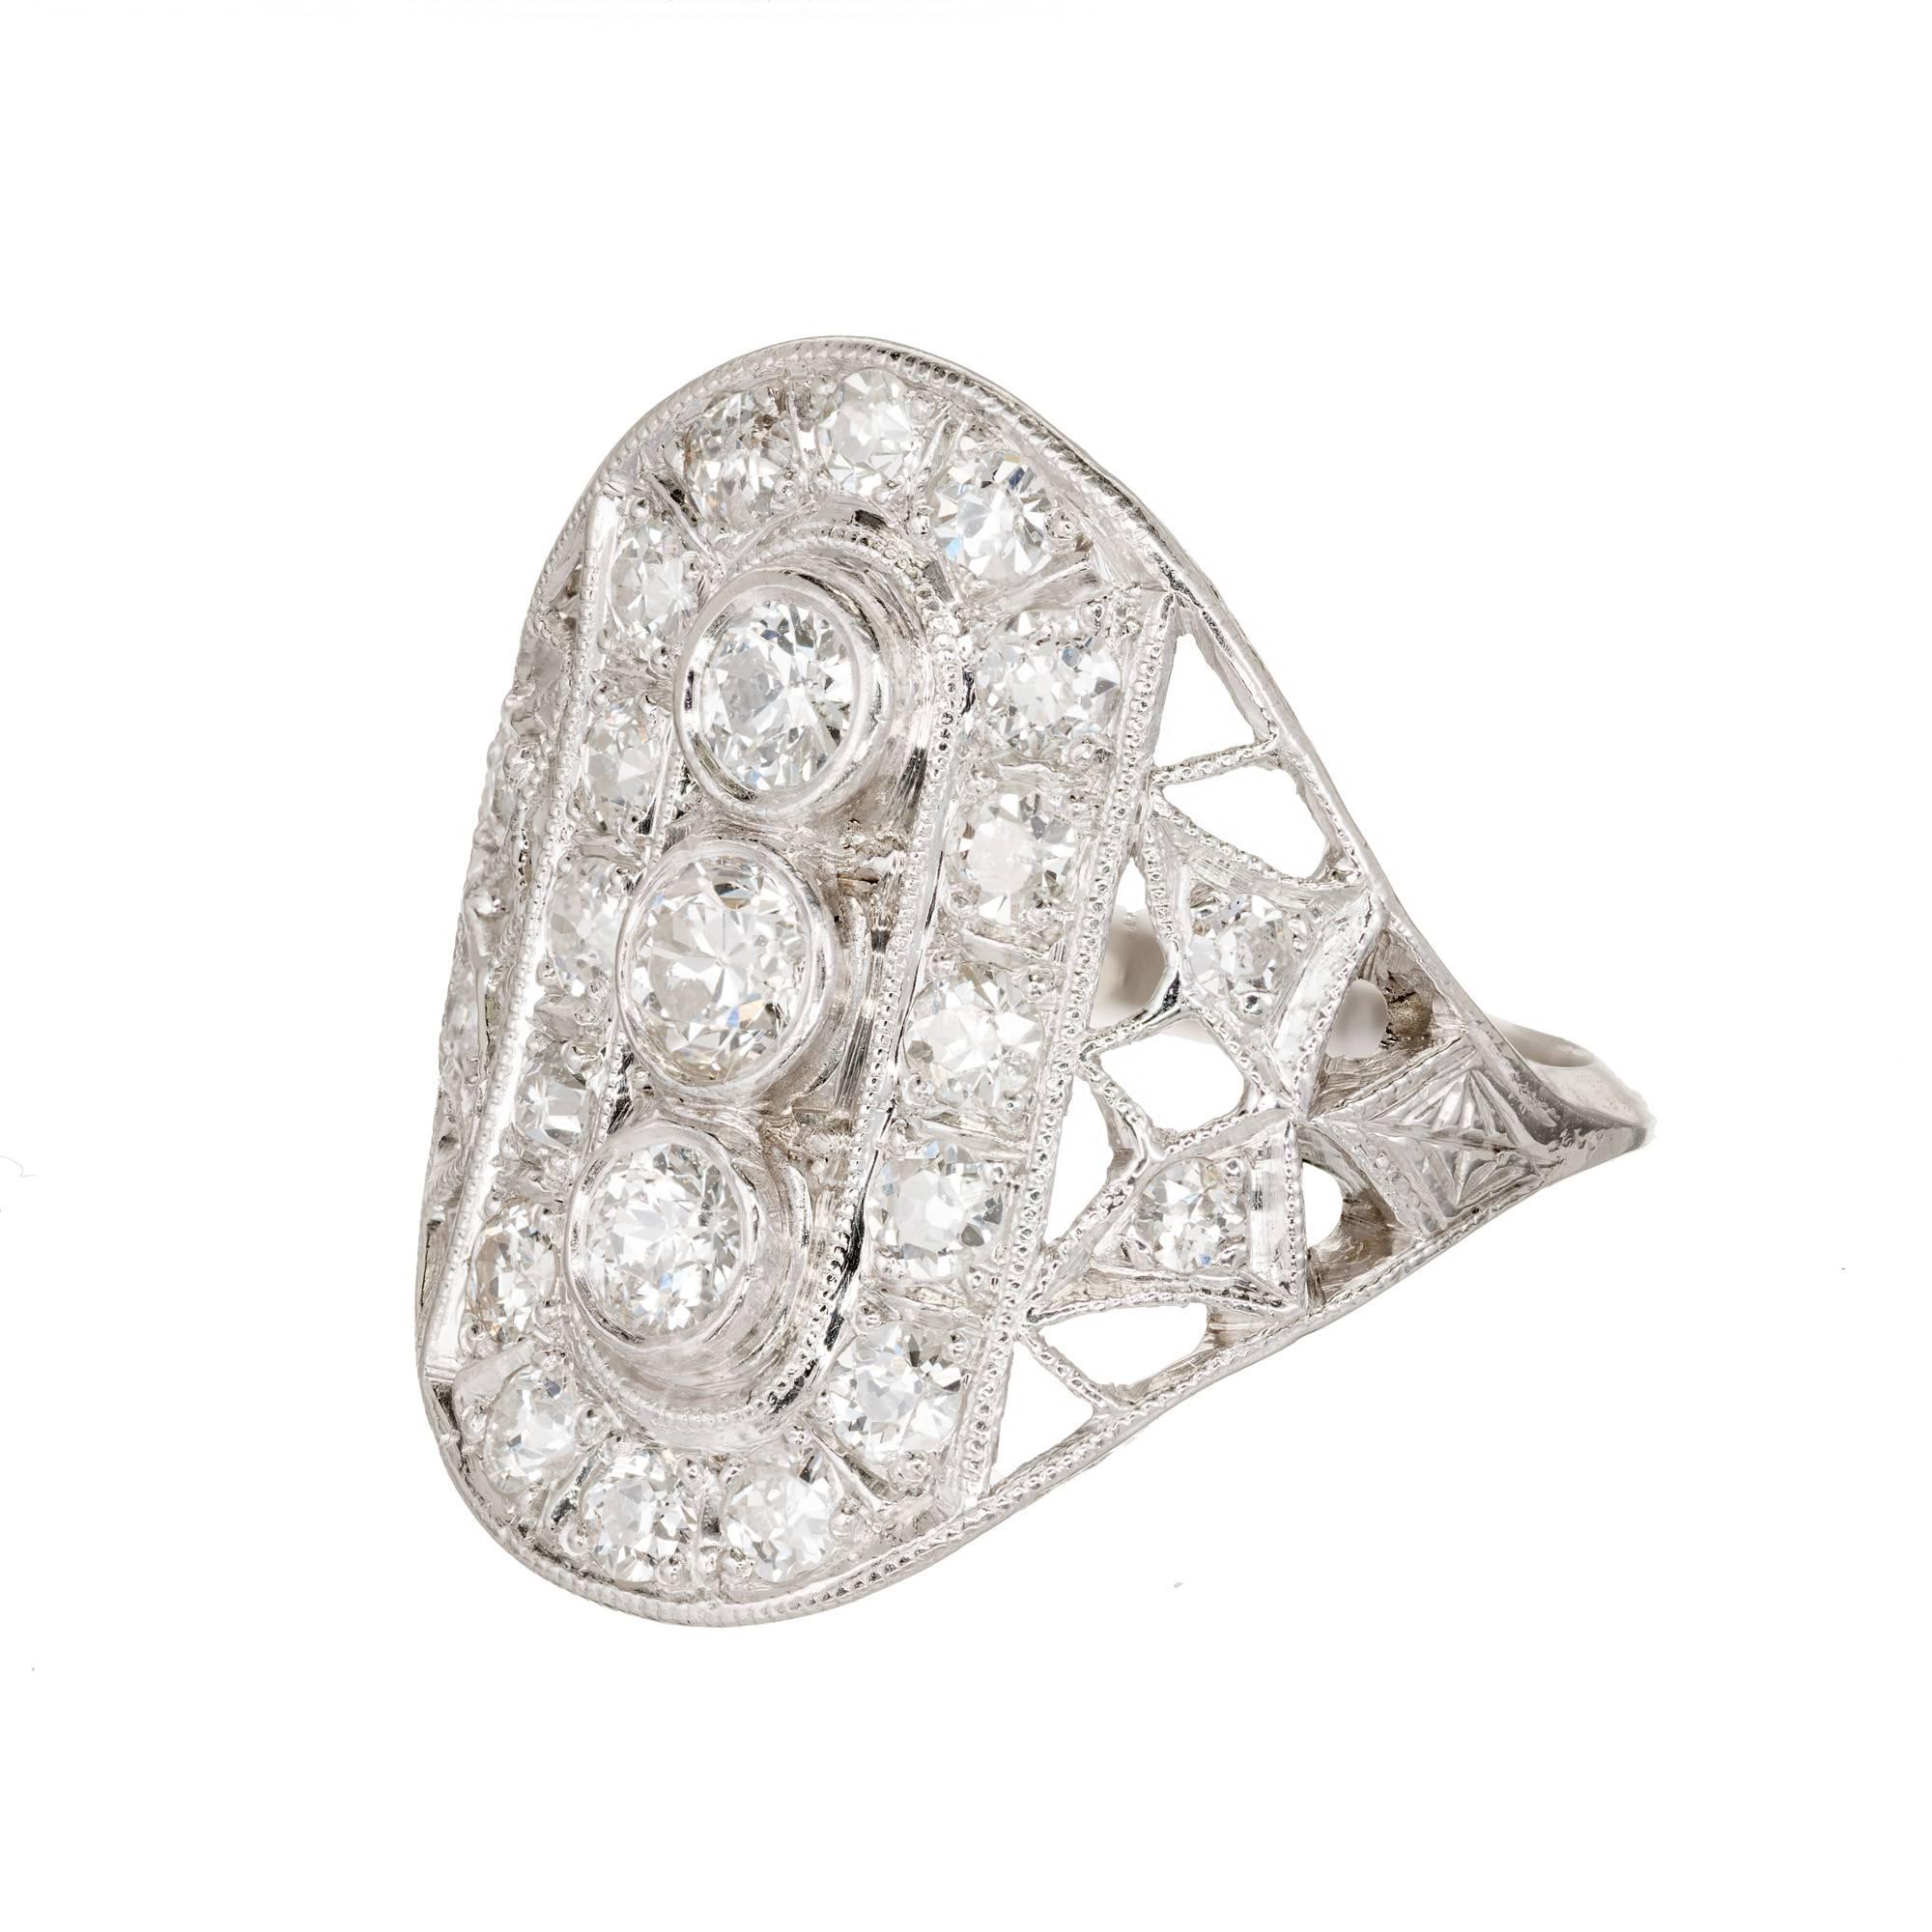 Art Deco 1910 vintage open work platinum diamond cocktail ring with Old European cut diamonds. 

3 Old European diamonds F VS approximate .45 carats
20 round Old European cut diamonds F VS approximate .55 carats
Size 6.5 and sizable
Platinum
Tested: